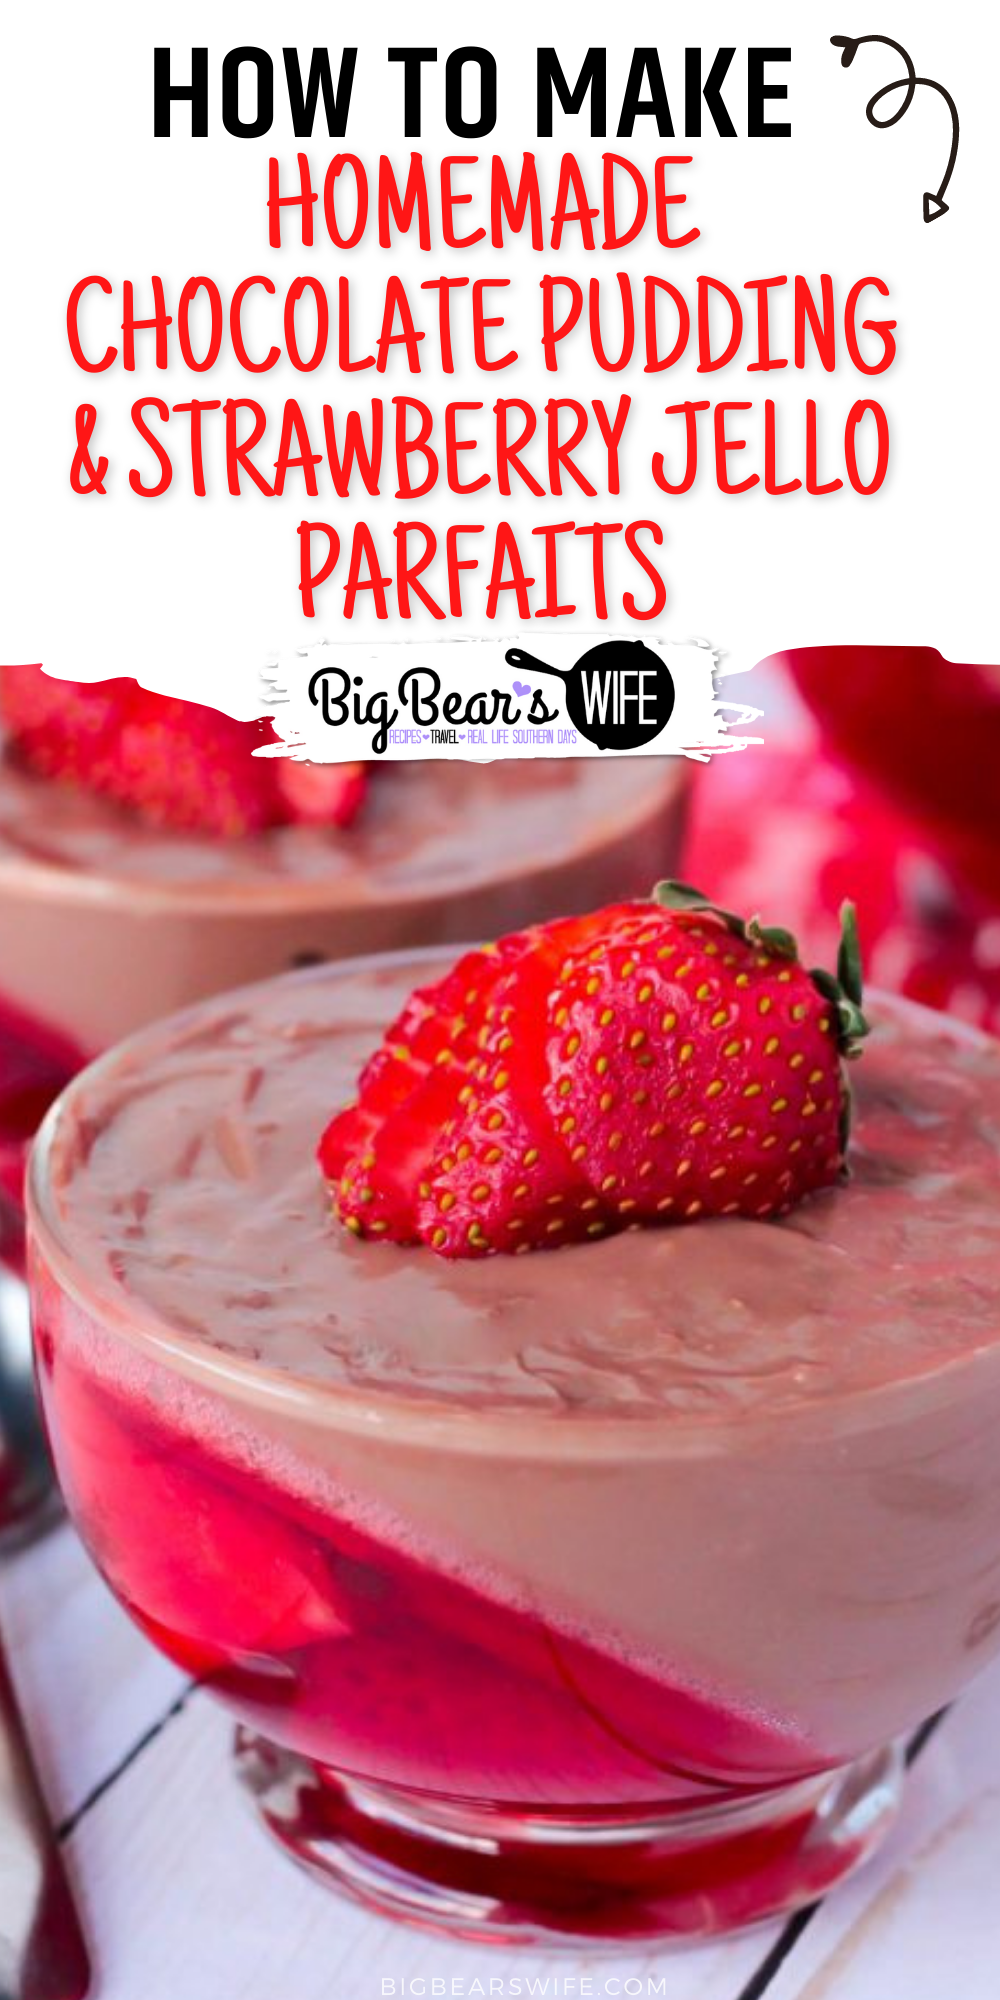  Chocolate Pudding and Strawberry Jello Parfaits are made up of wonderful homemade chocolate pudding on one side of the glass and and strawberry Jello with fresh strawberry slices on the other. This easy dessert recipe is perfect for chefs of all ages. Impress your family and friend with this beautiful sweet treat that can be created by anyone! via @bigbearswife